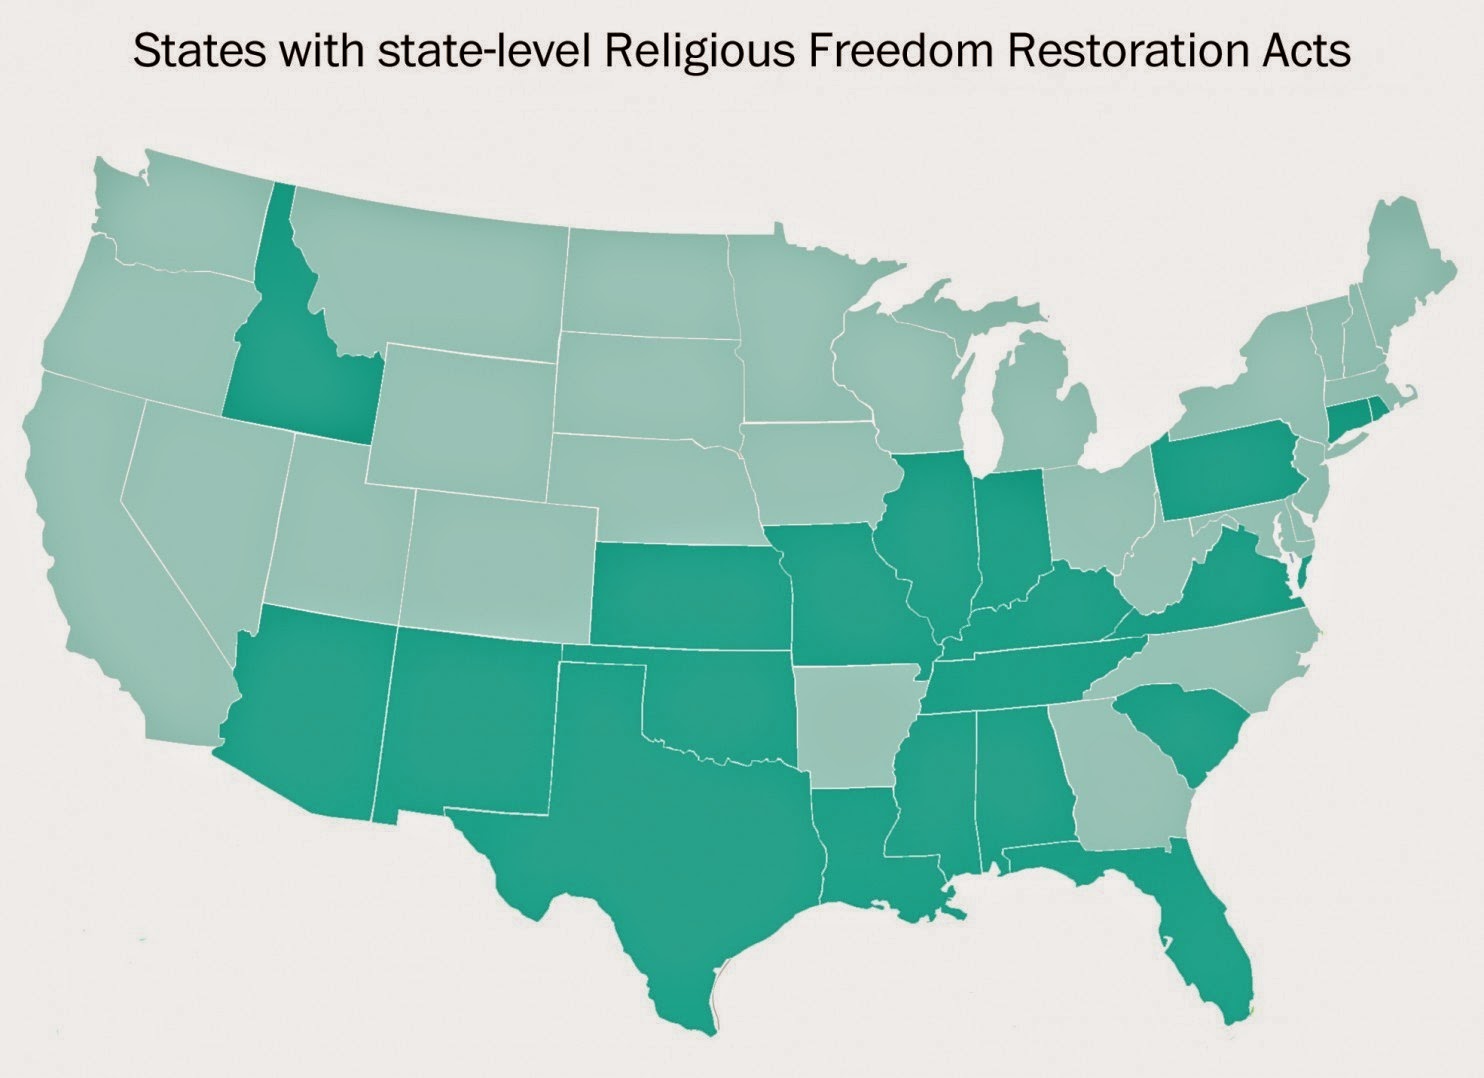 He states that. State of Freedom. Southern States. Most religious us States.